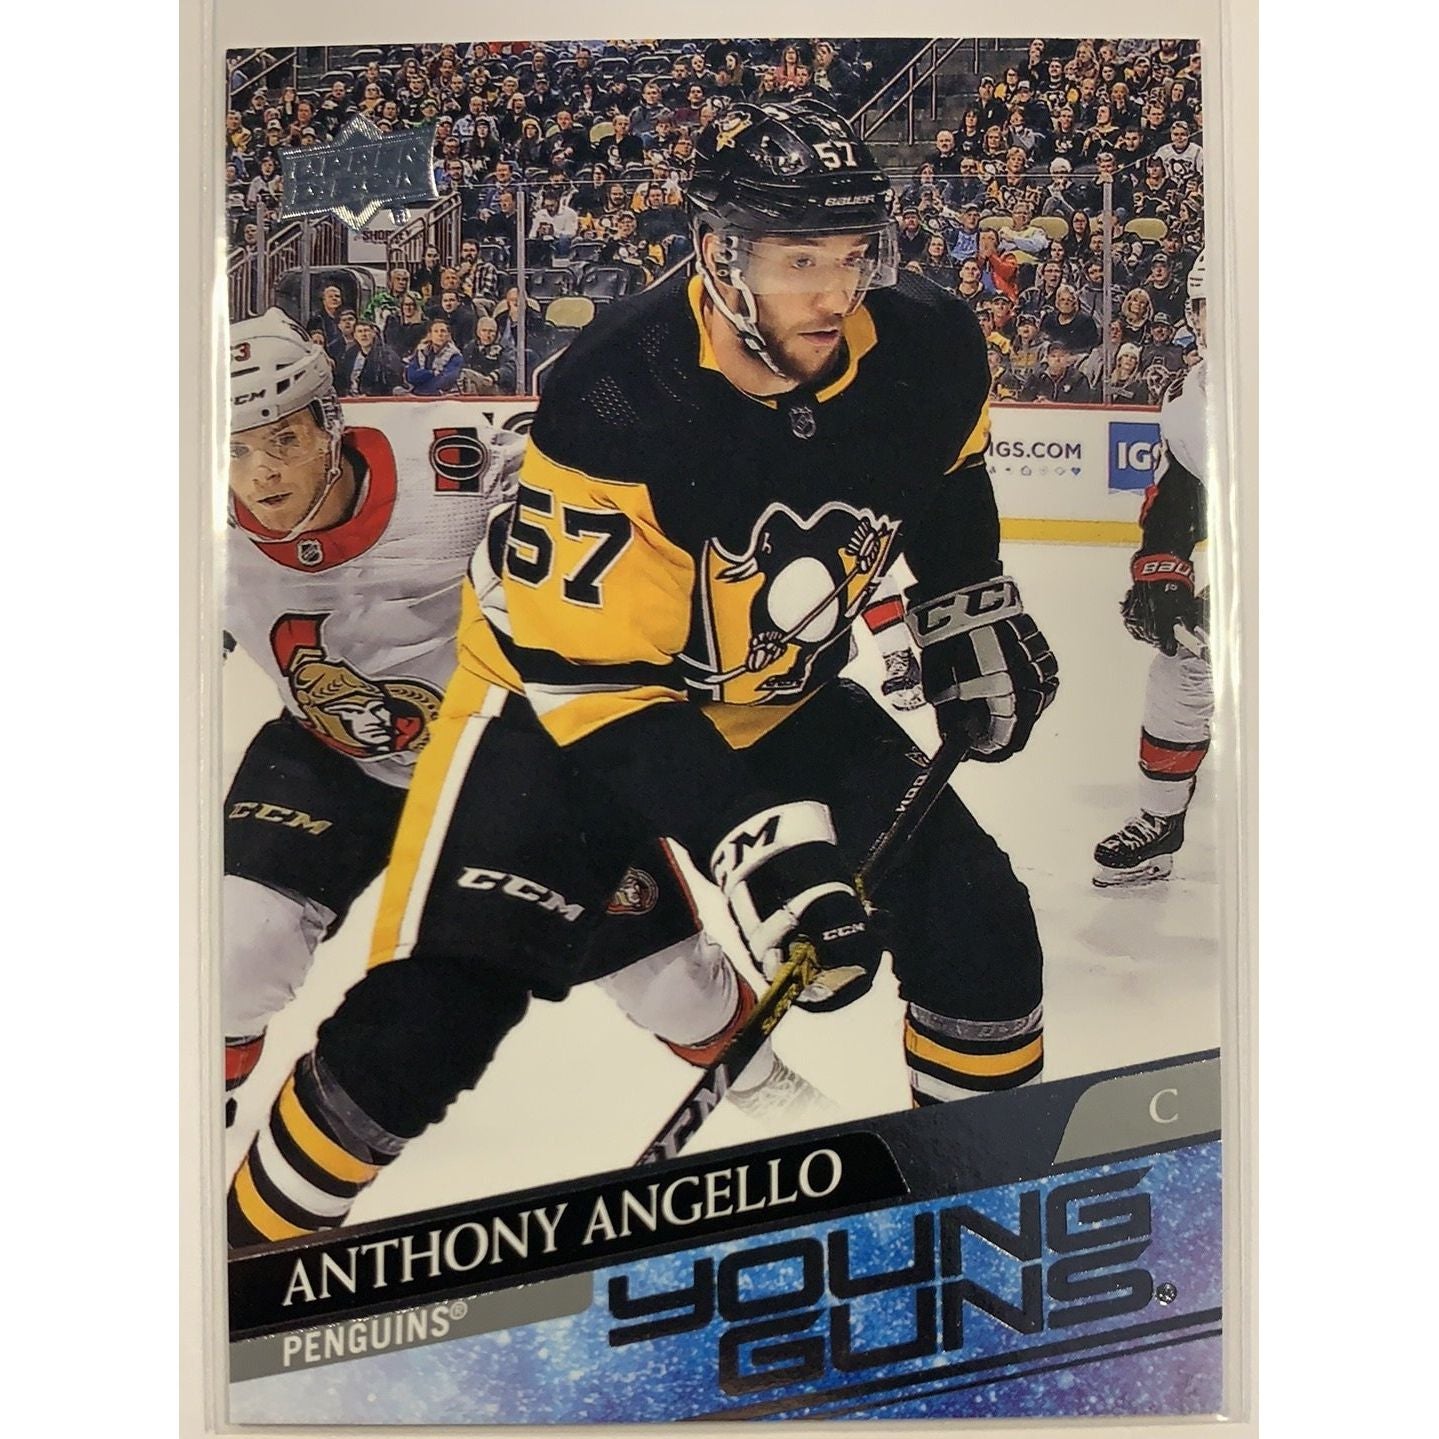  2020-21 Upper Deck Series 2 Anthony Angelo Young Guns  Local Legends Cards & Collectibles